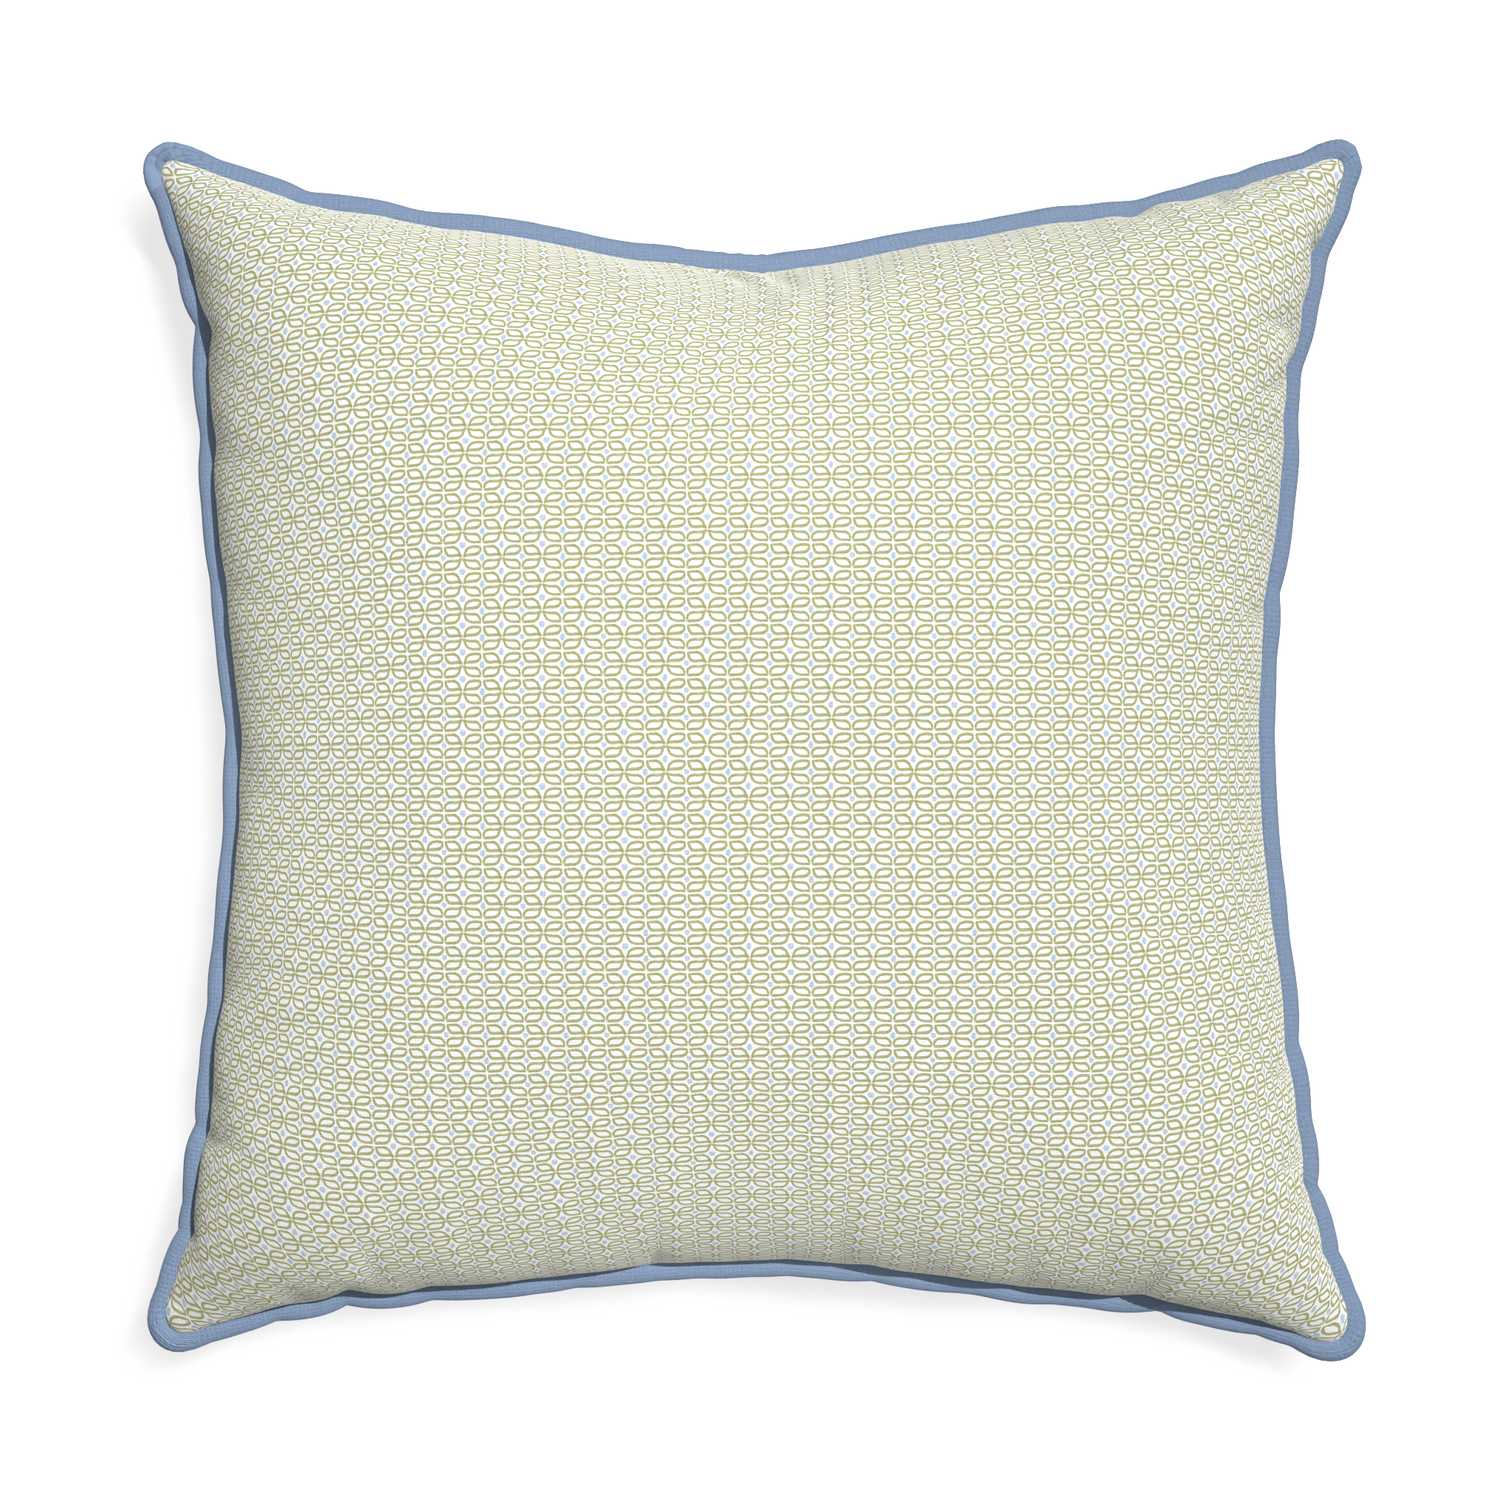 Euro-sham loomi moss custom moss green geometricpillow with sky piping on white background